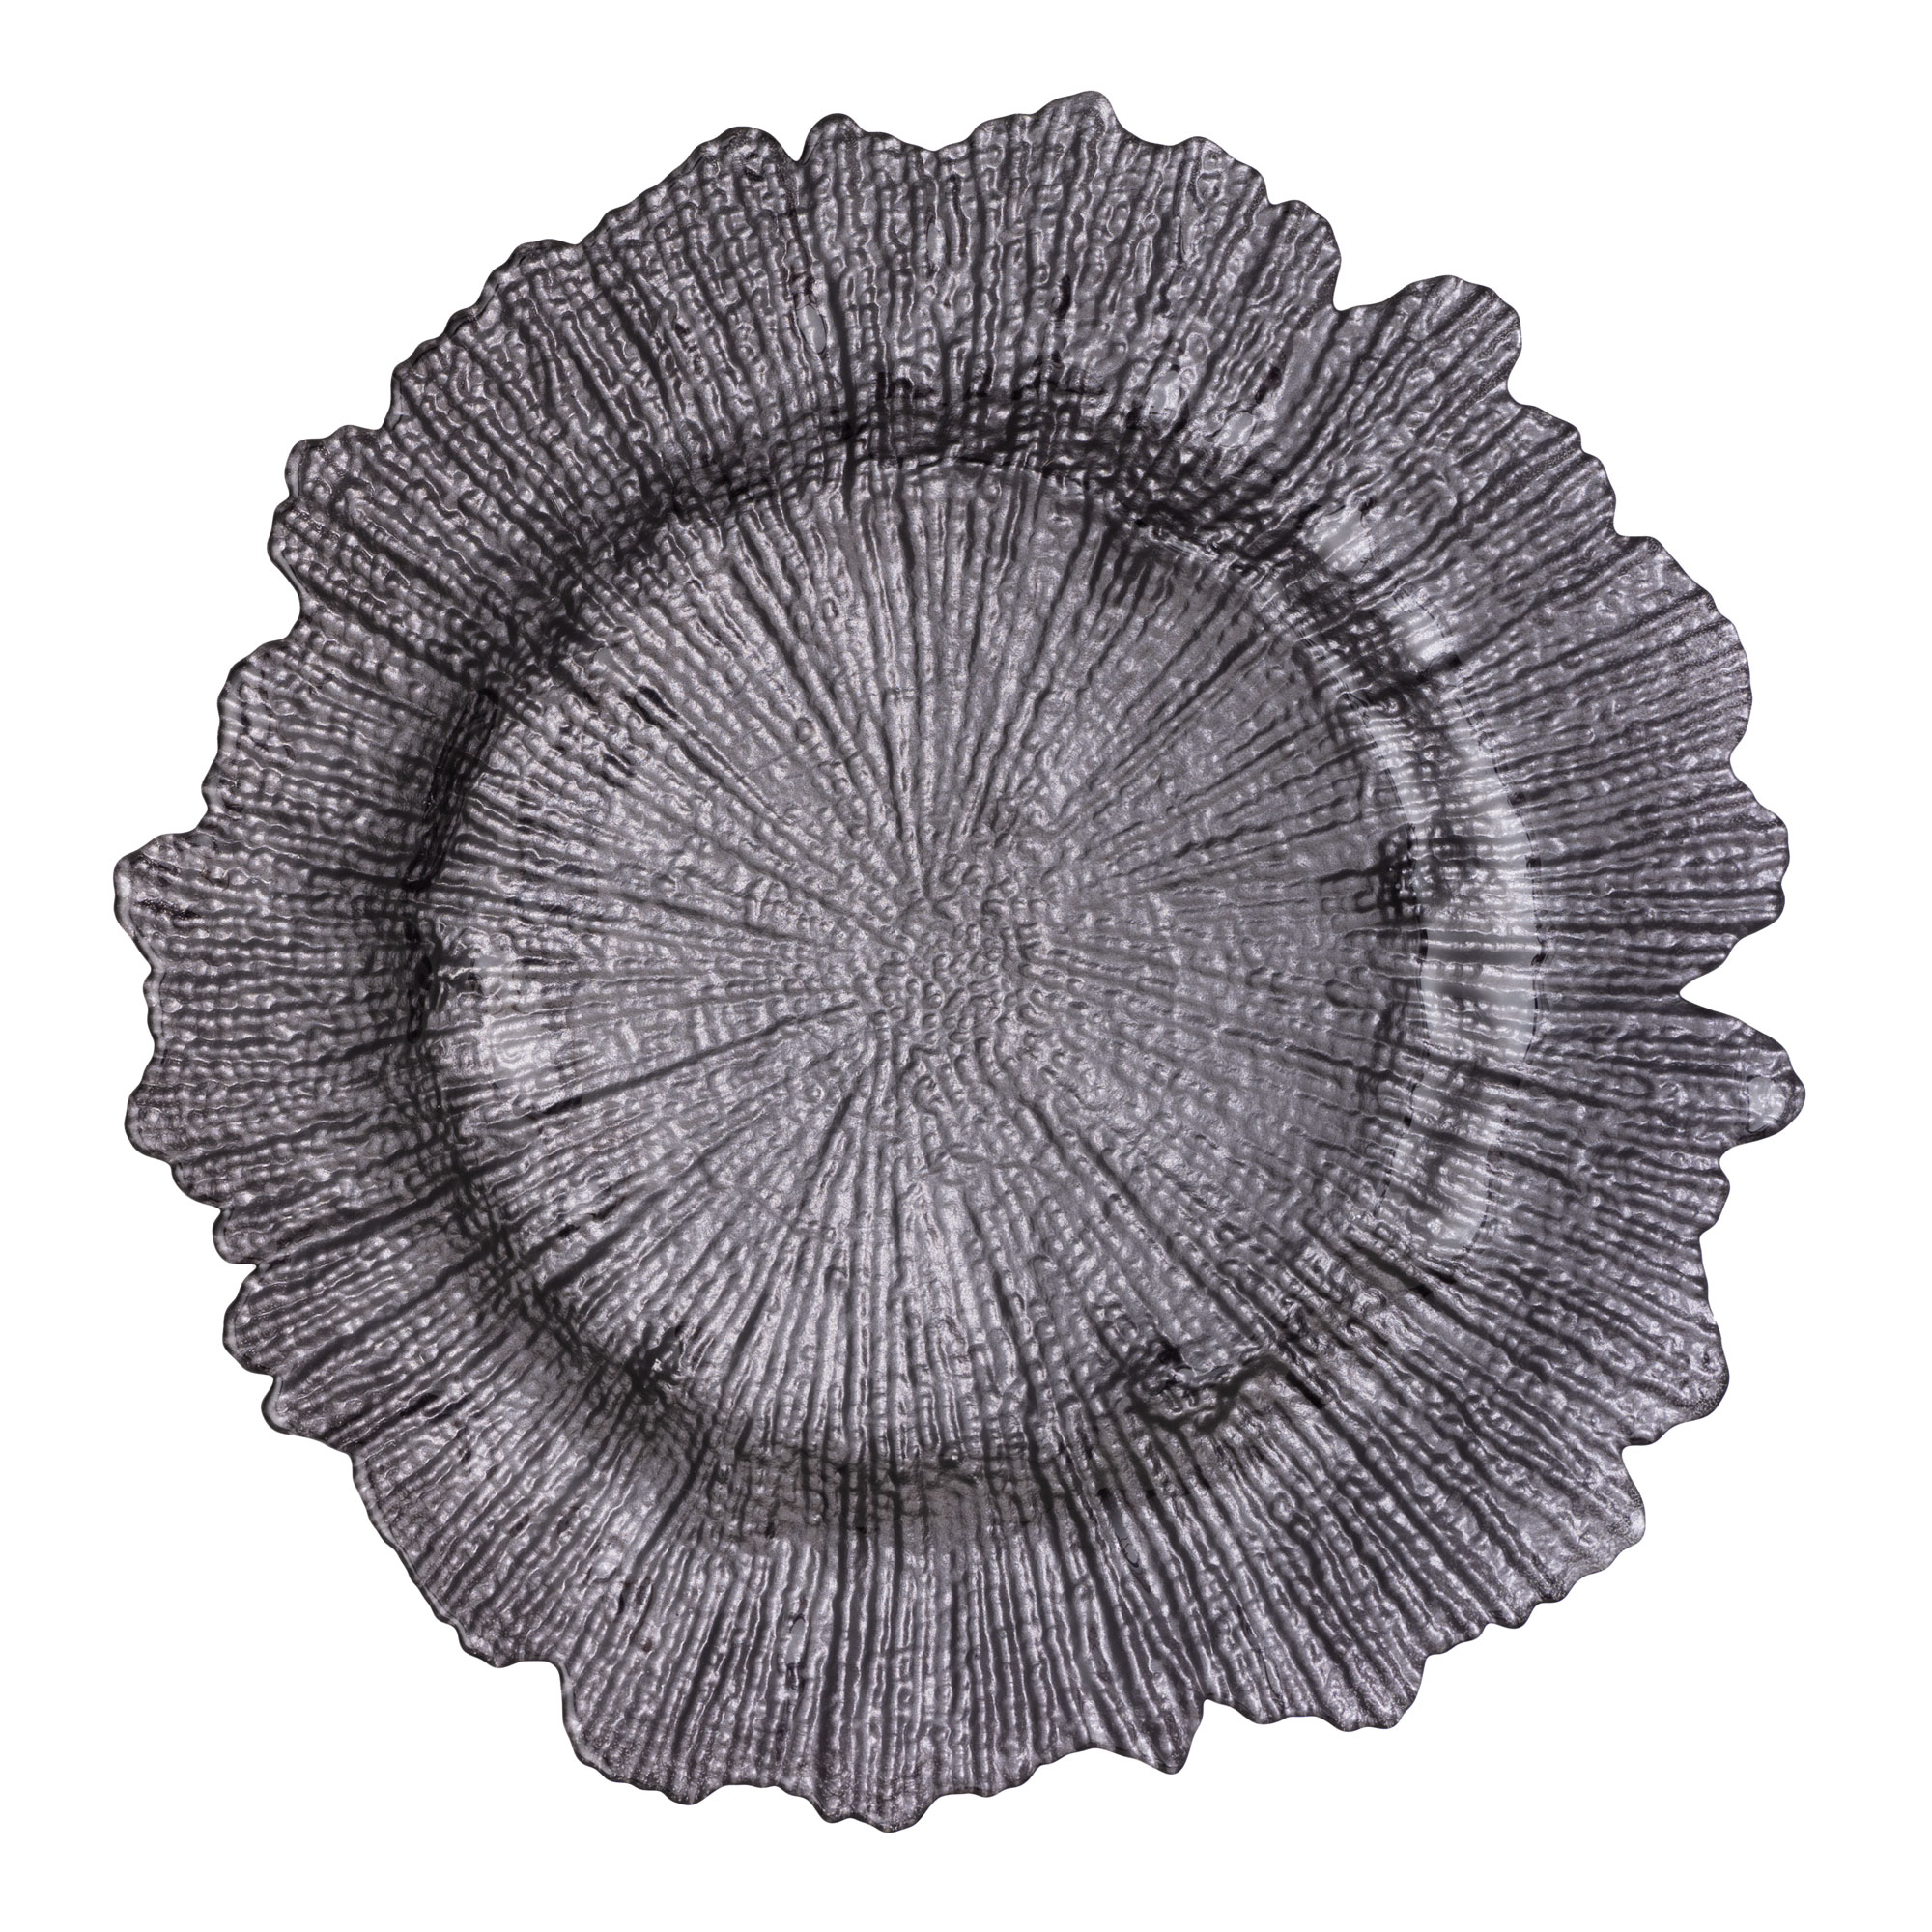 Glass Reef Charger Plate 13" - Charcoal